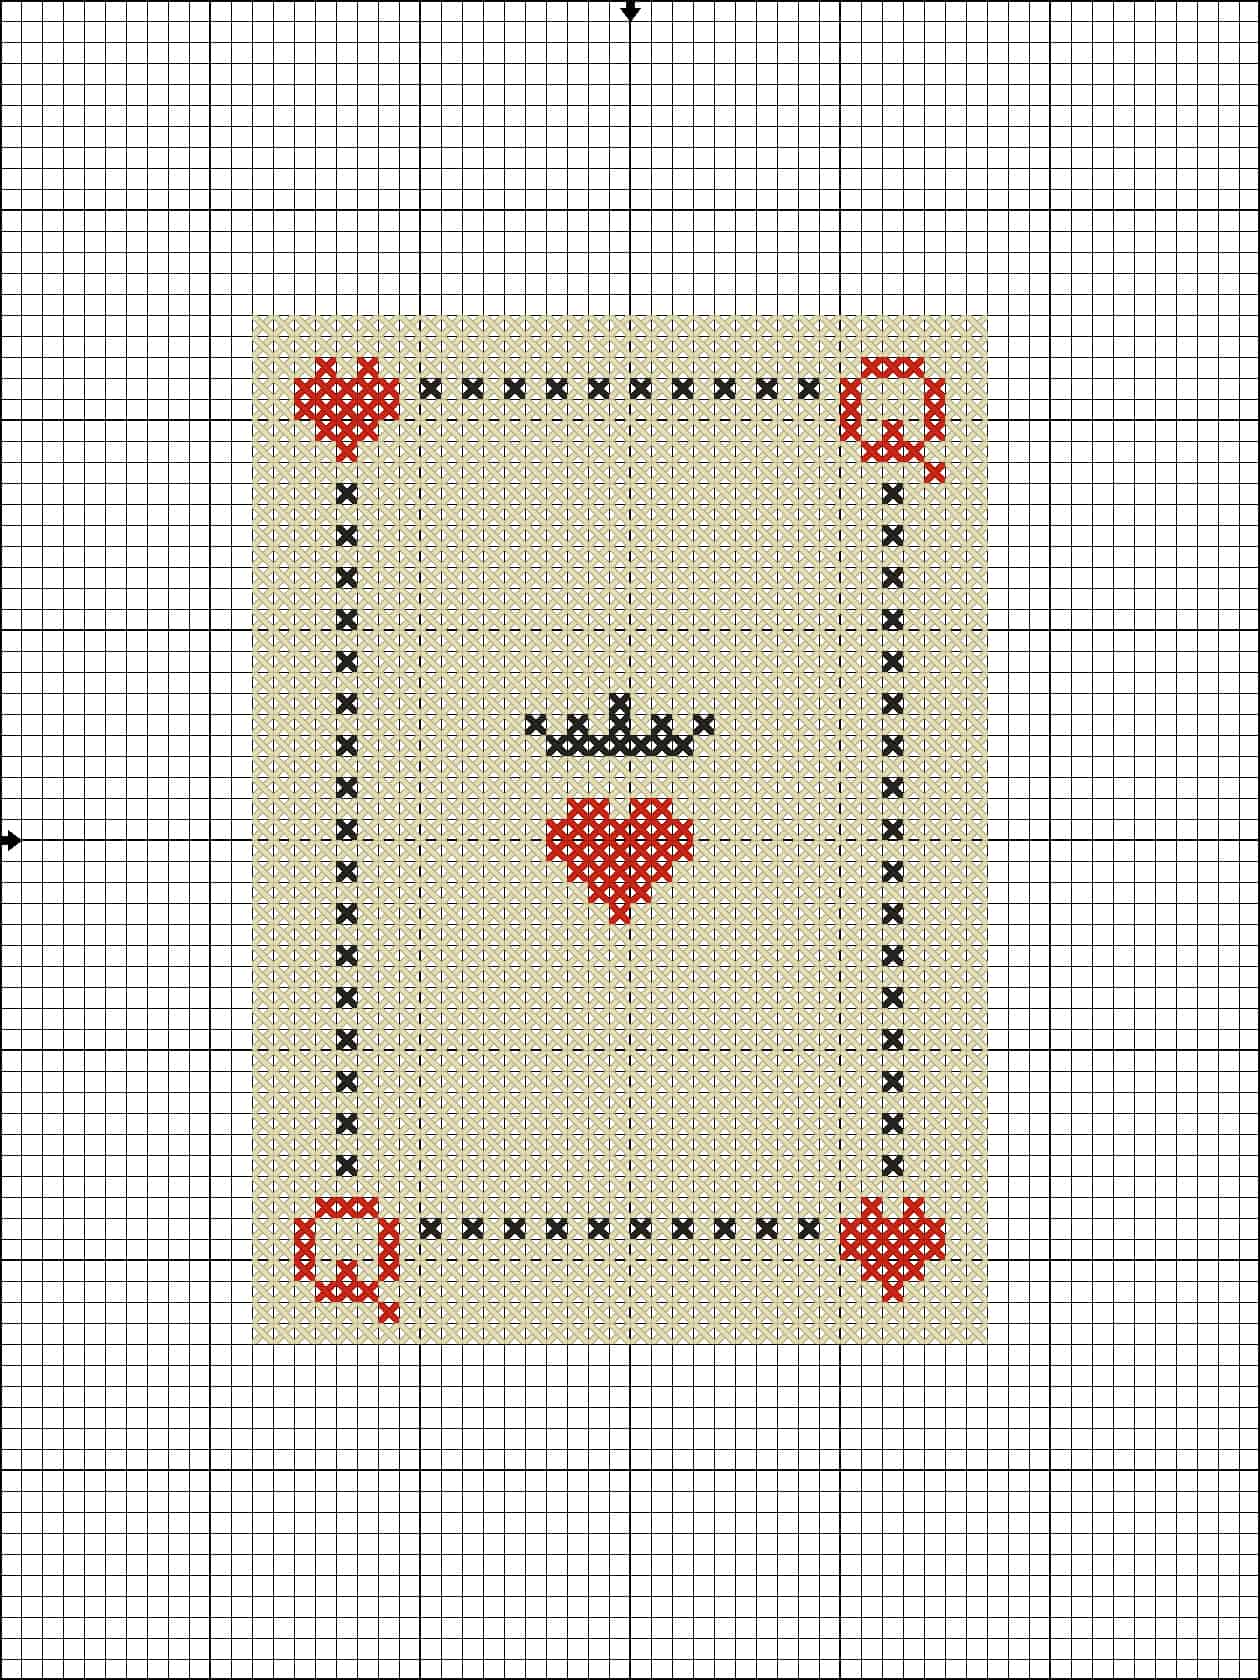 Playing card hooked rug